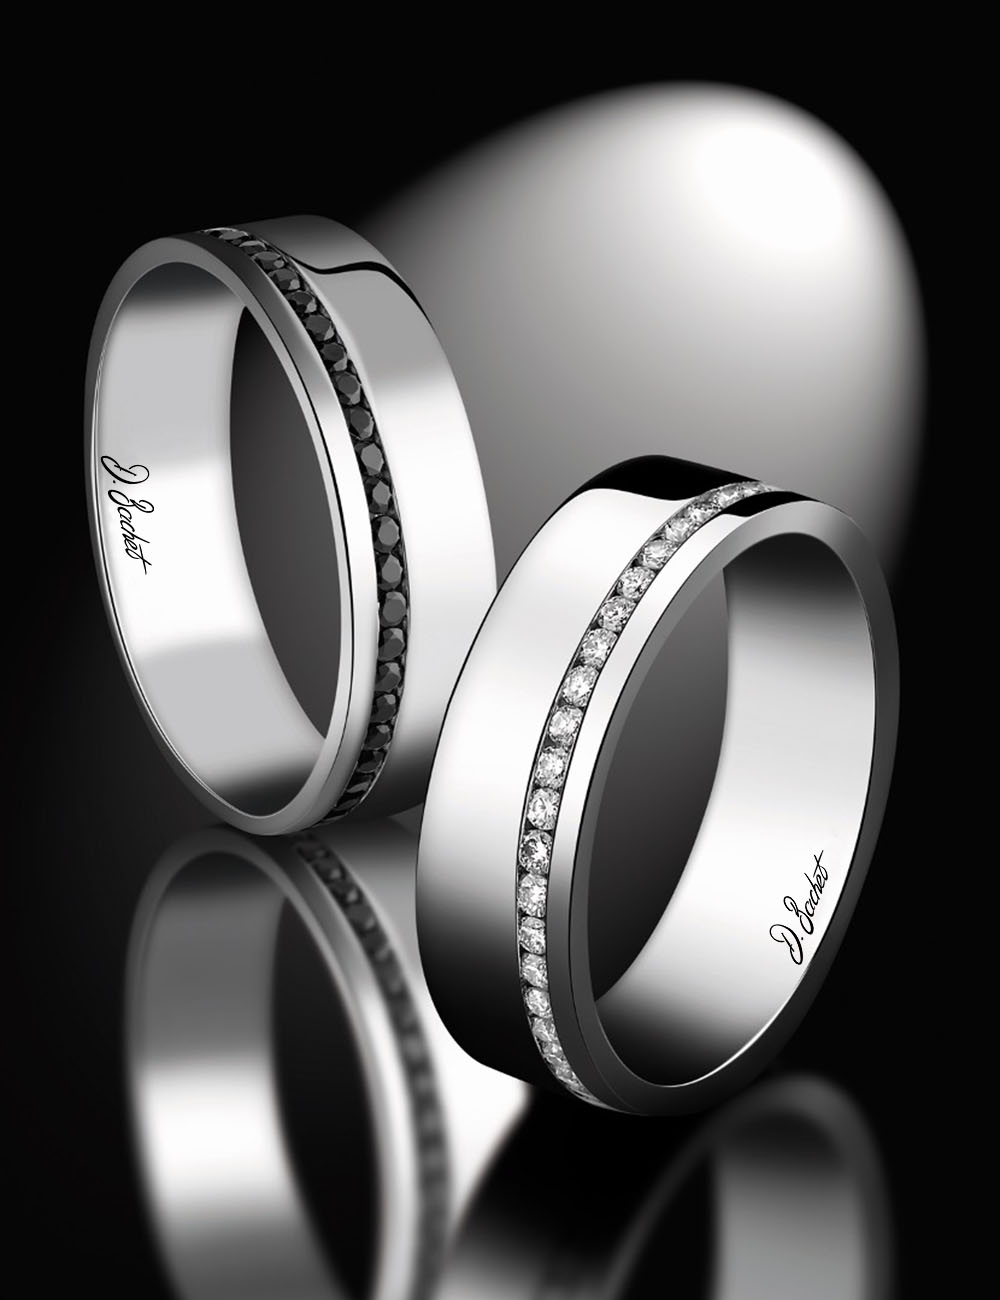 Unique 6mm wide wedding band breaking tradition with a powerful, luminous design, perfect for daily wear.